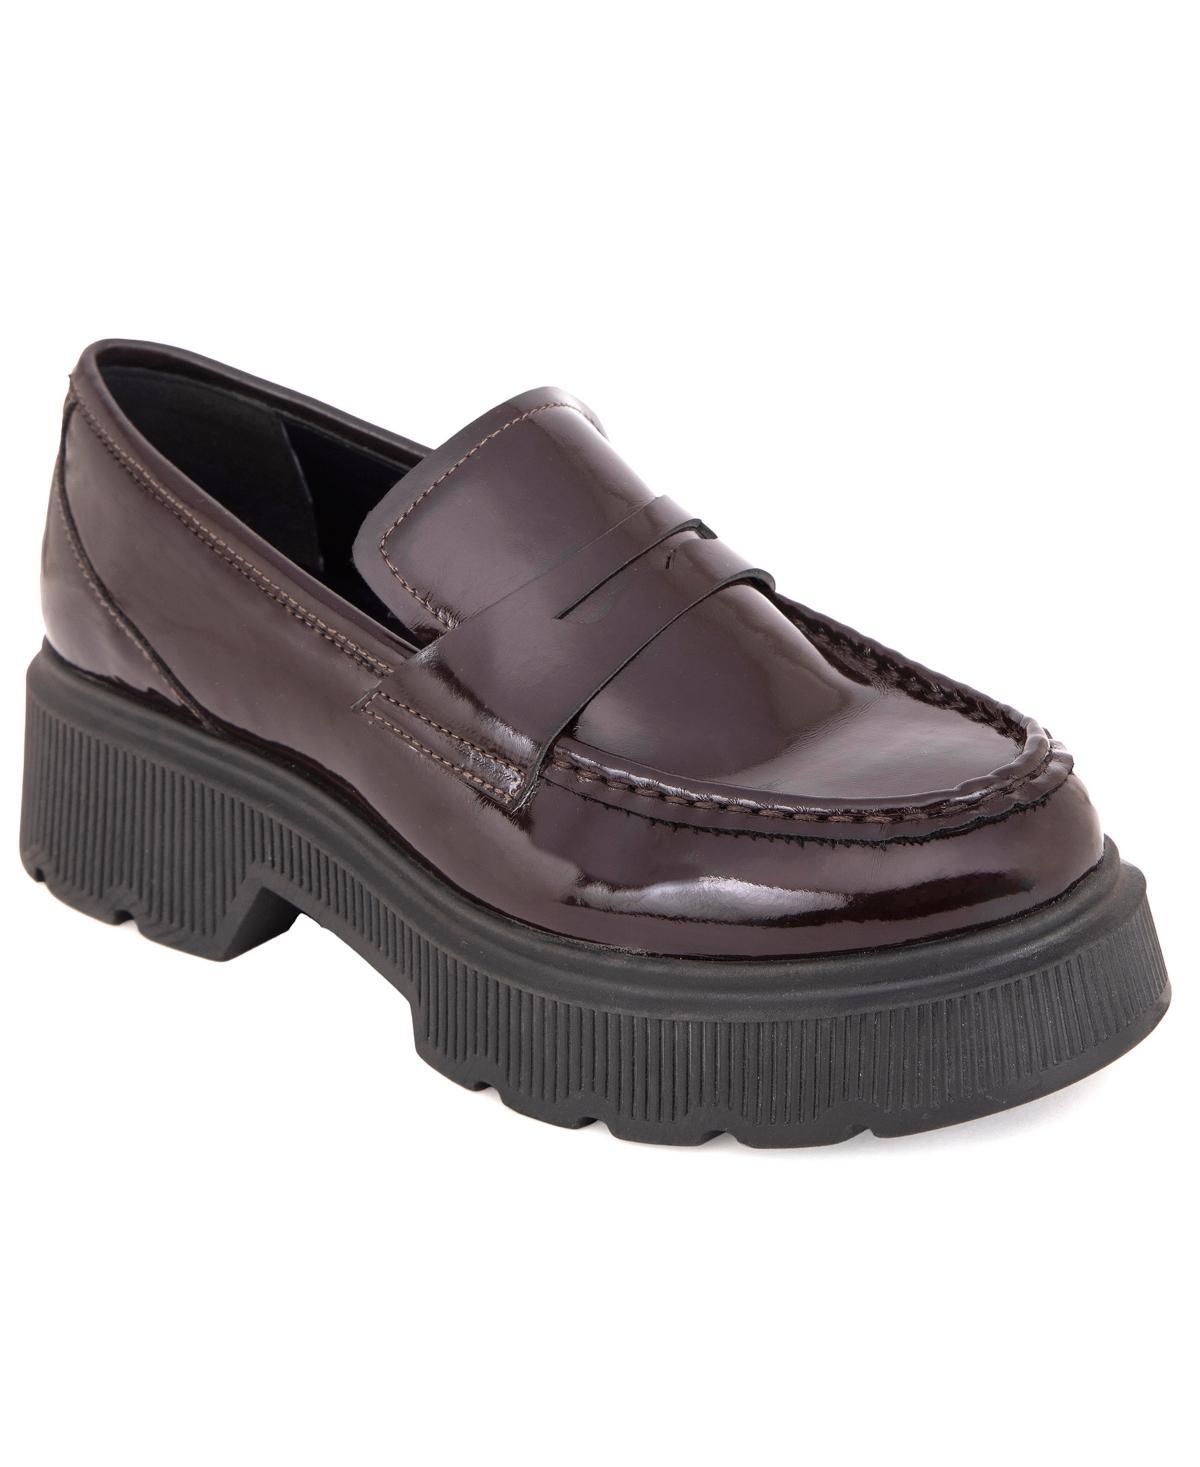 Kenneth Cole New York Womens Marge Lug Sole Loafers Womens Shoes Product Image